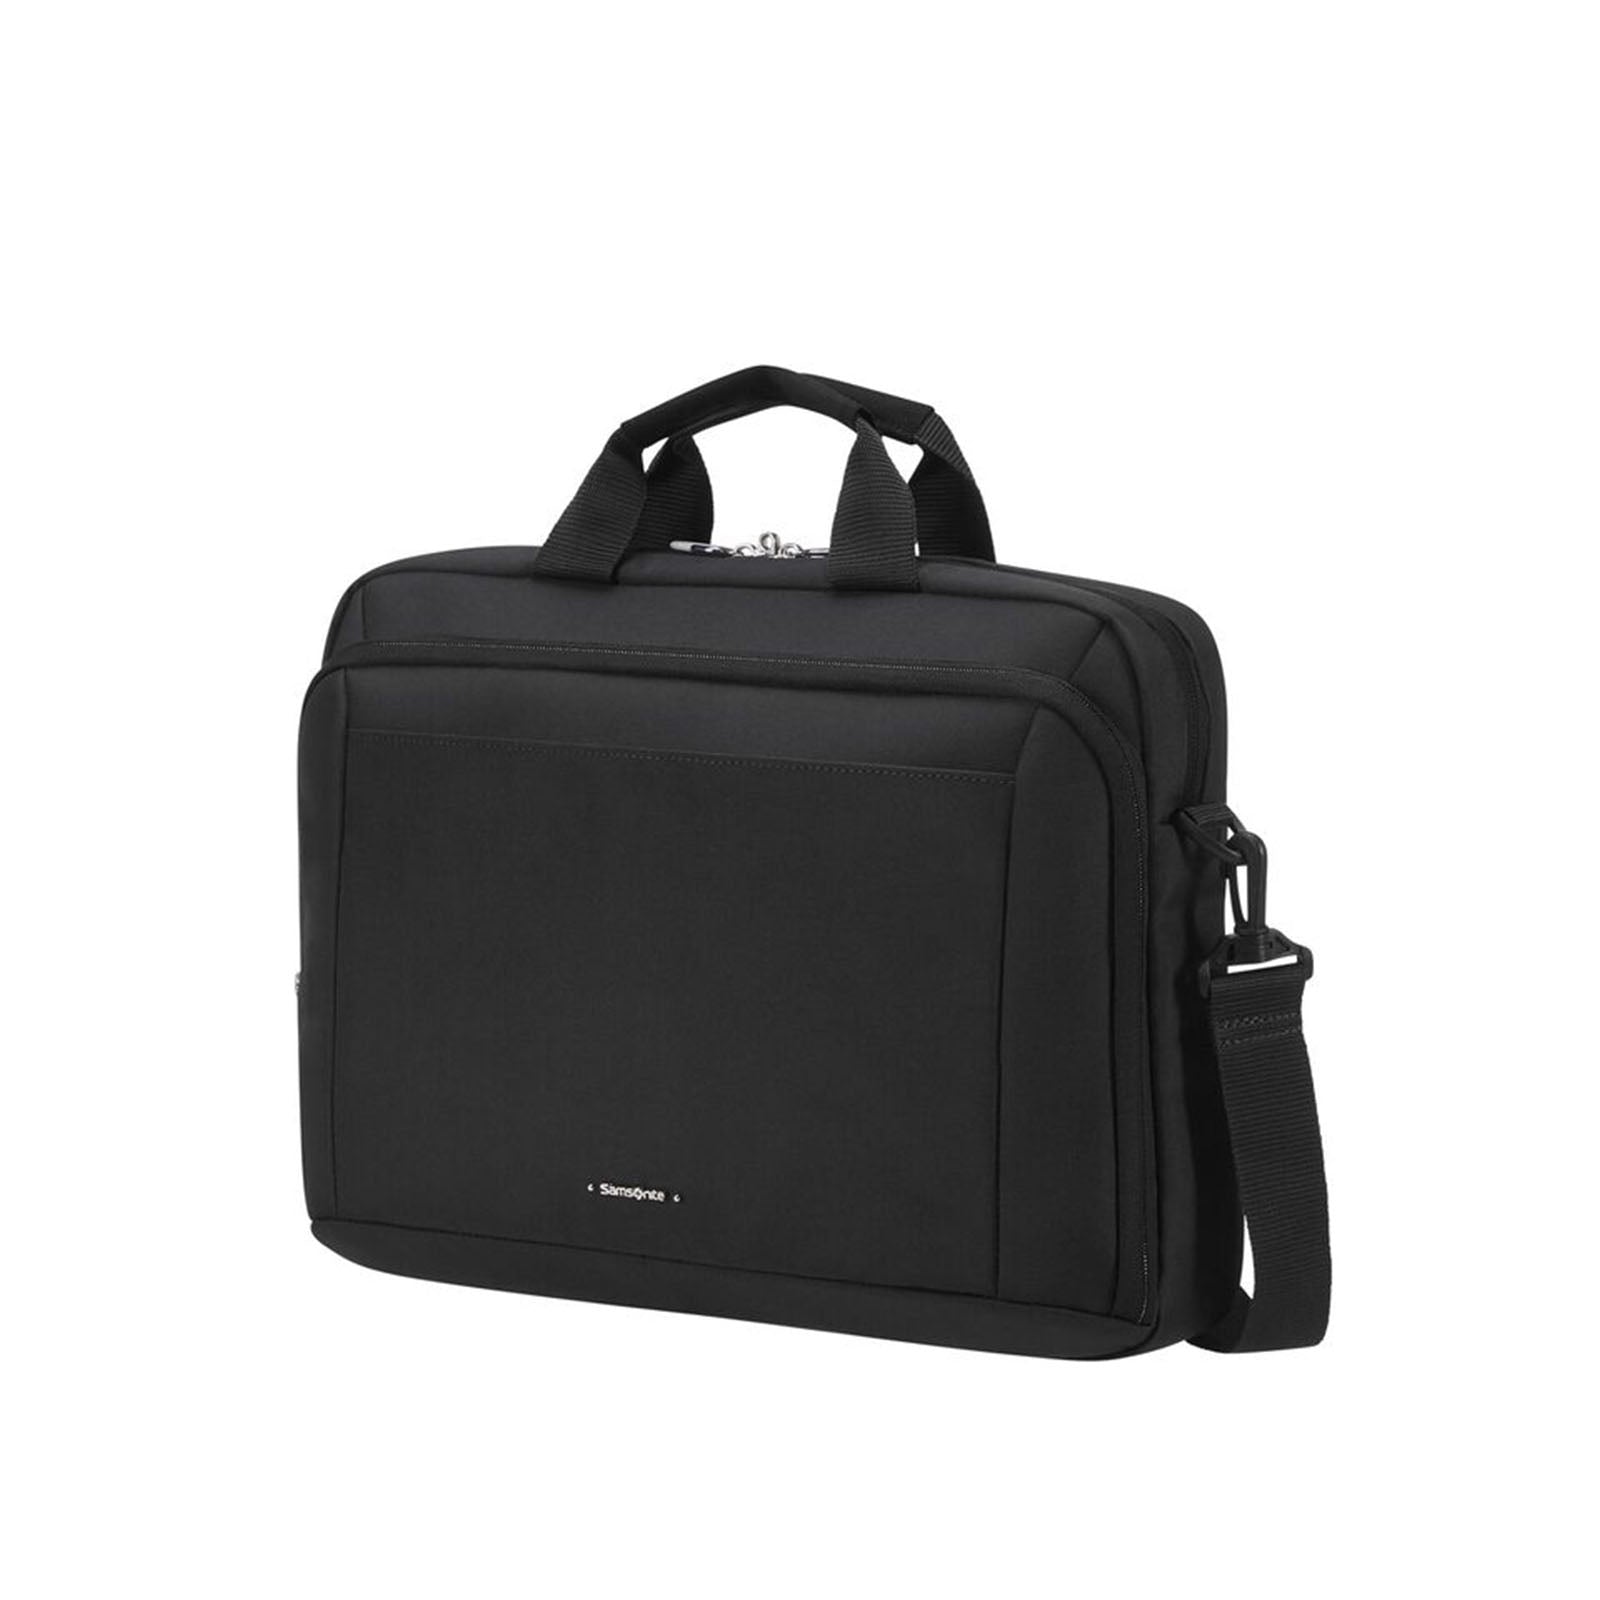 Samsonite-Guardit-Classy-15-Inch-Laptop-Bailhandle-Black-Front-Angle